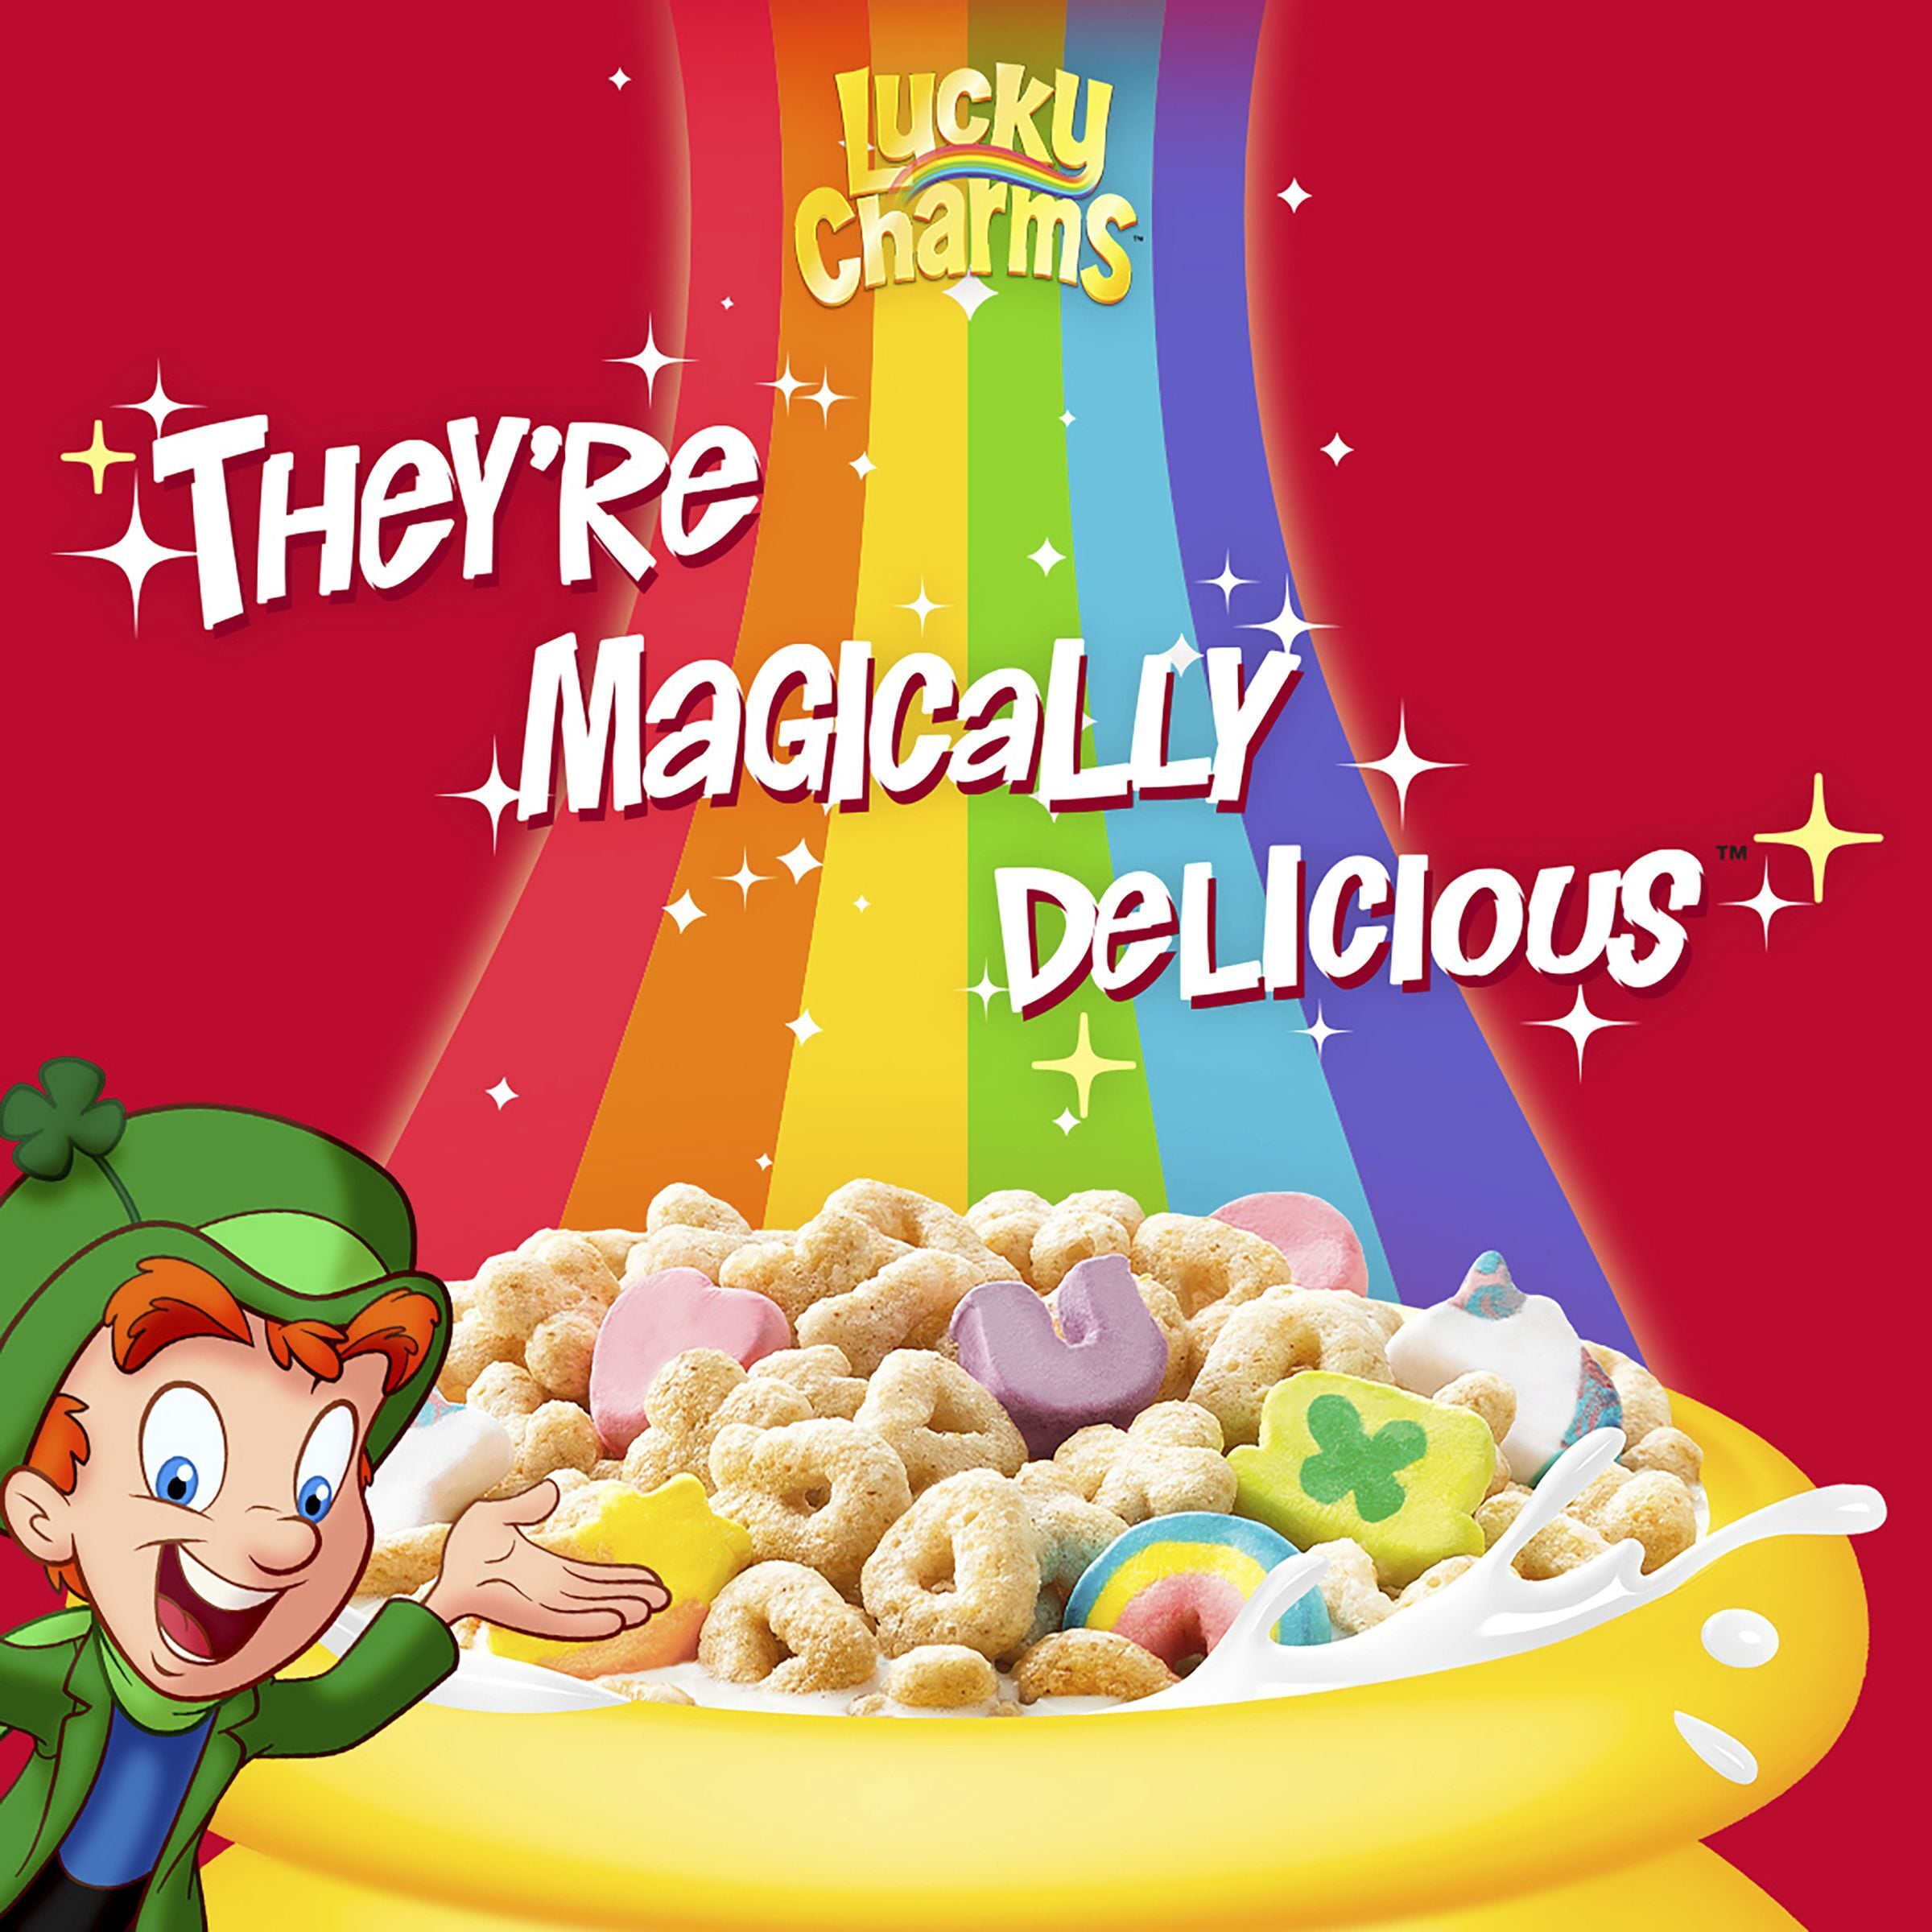 Family Size Limited Edition CHOCOLATE LUCKY CHARMS Cereal Box Only